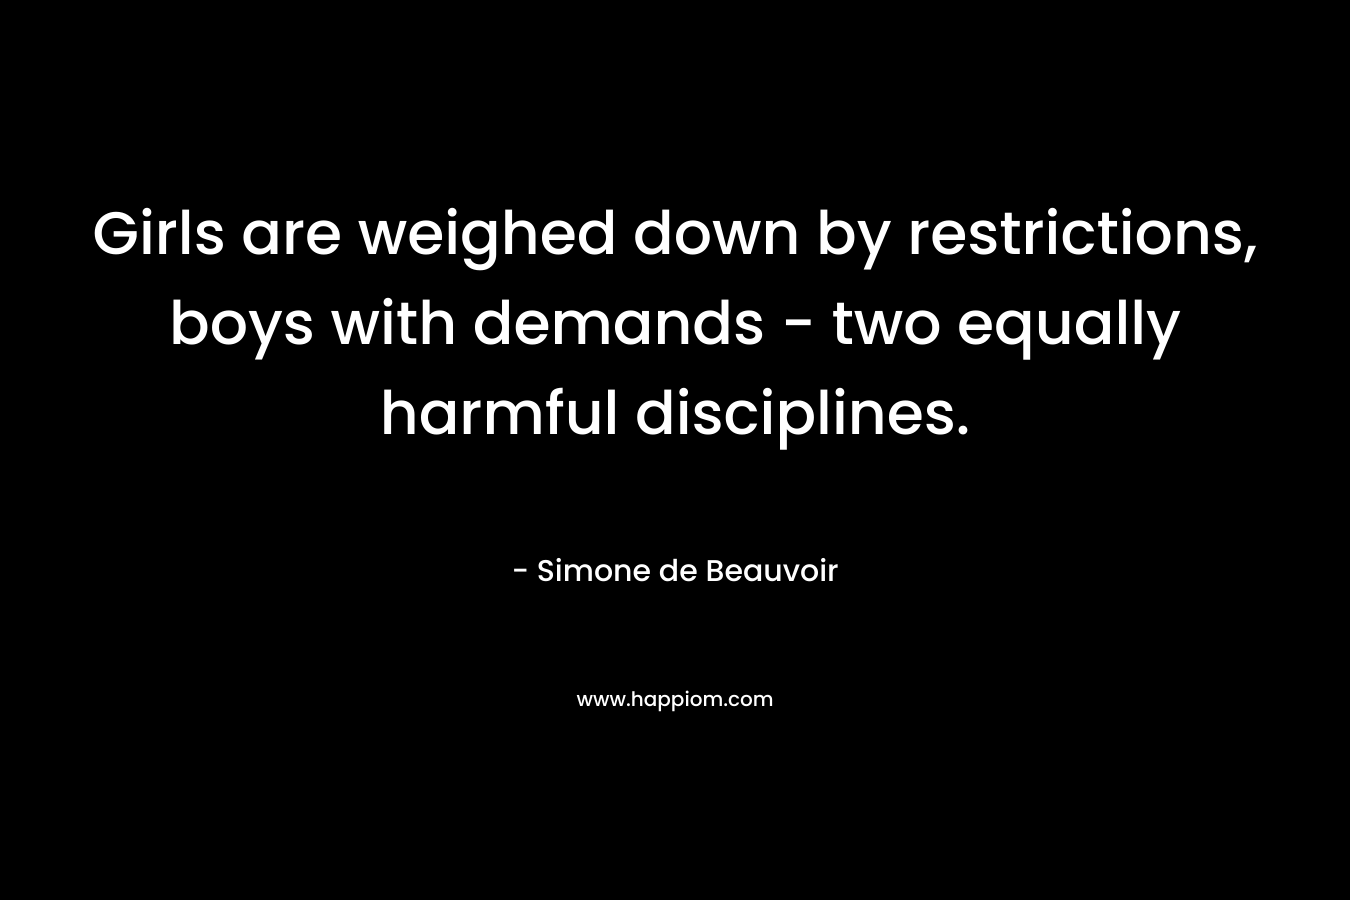 Girls are weighed down by restrictions, boys with demands – two equally harmful disciplines. – Simone de Beauvoir